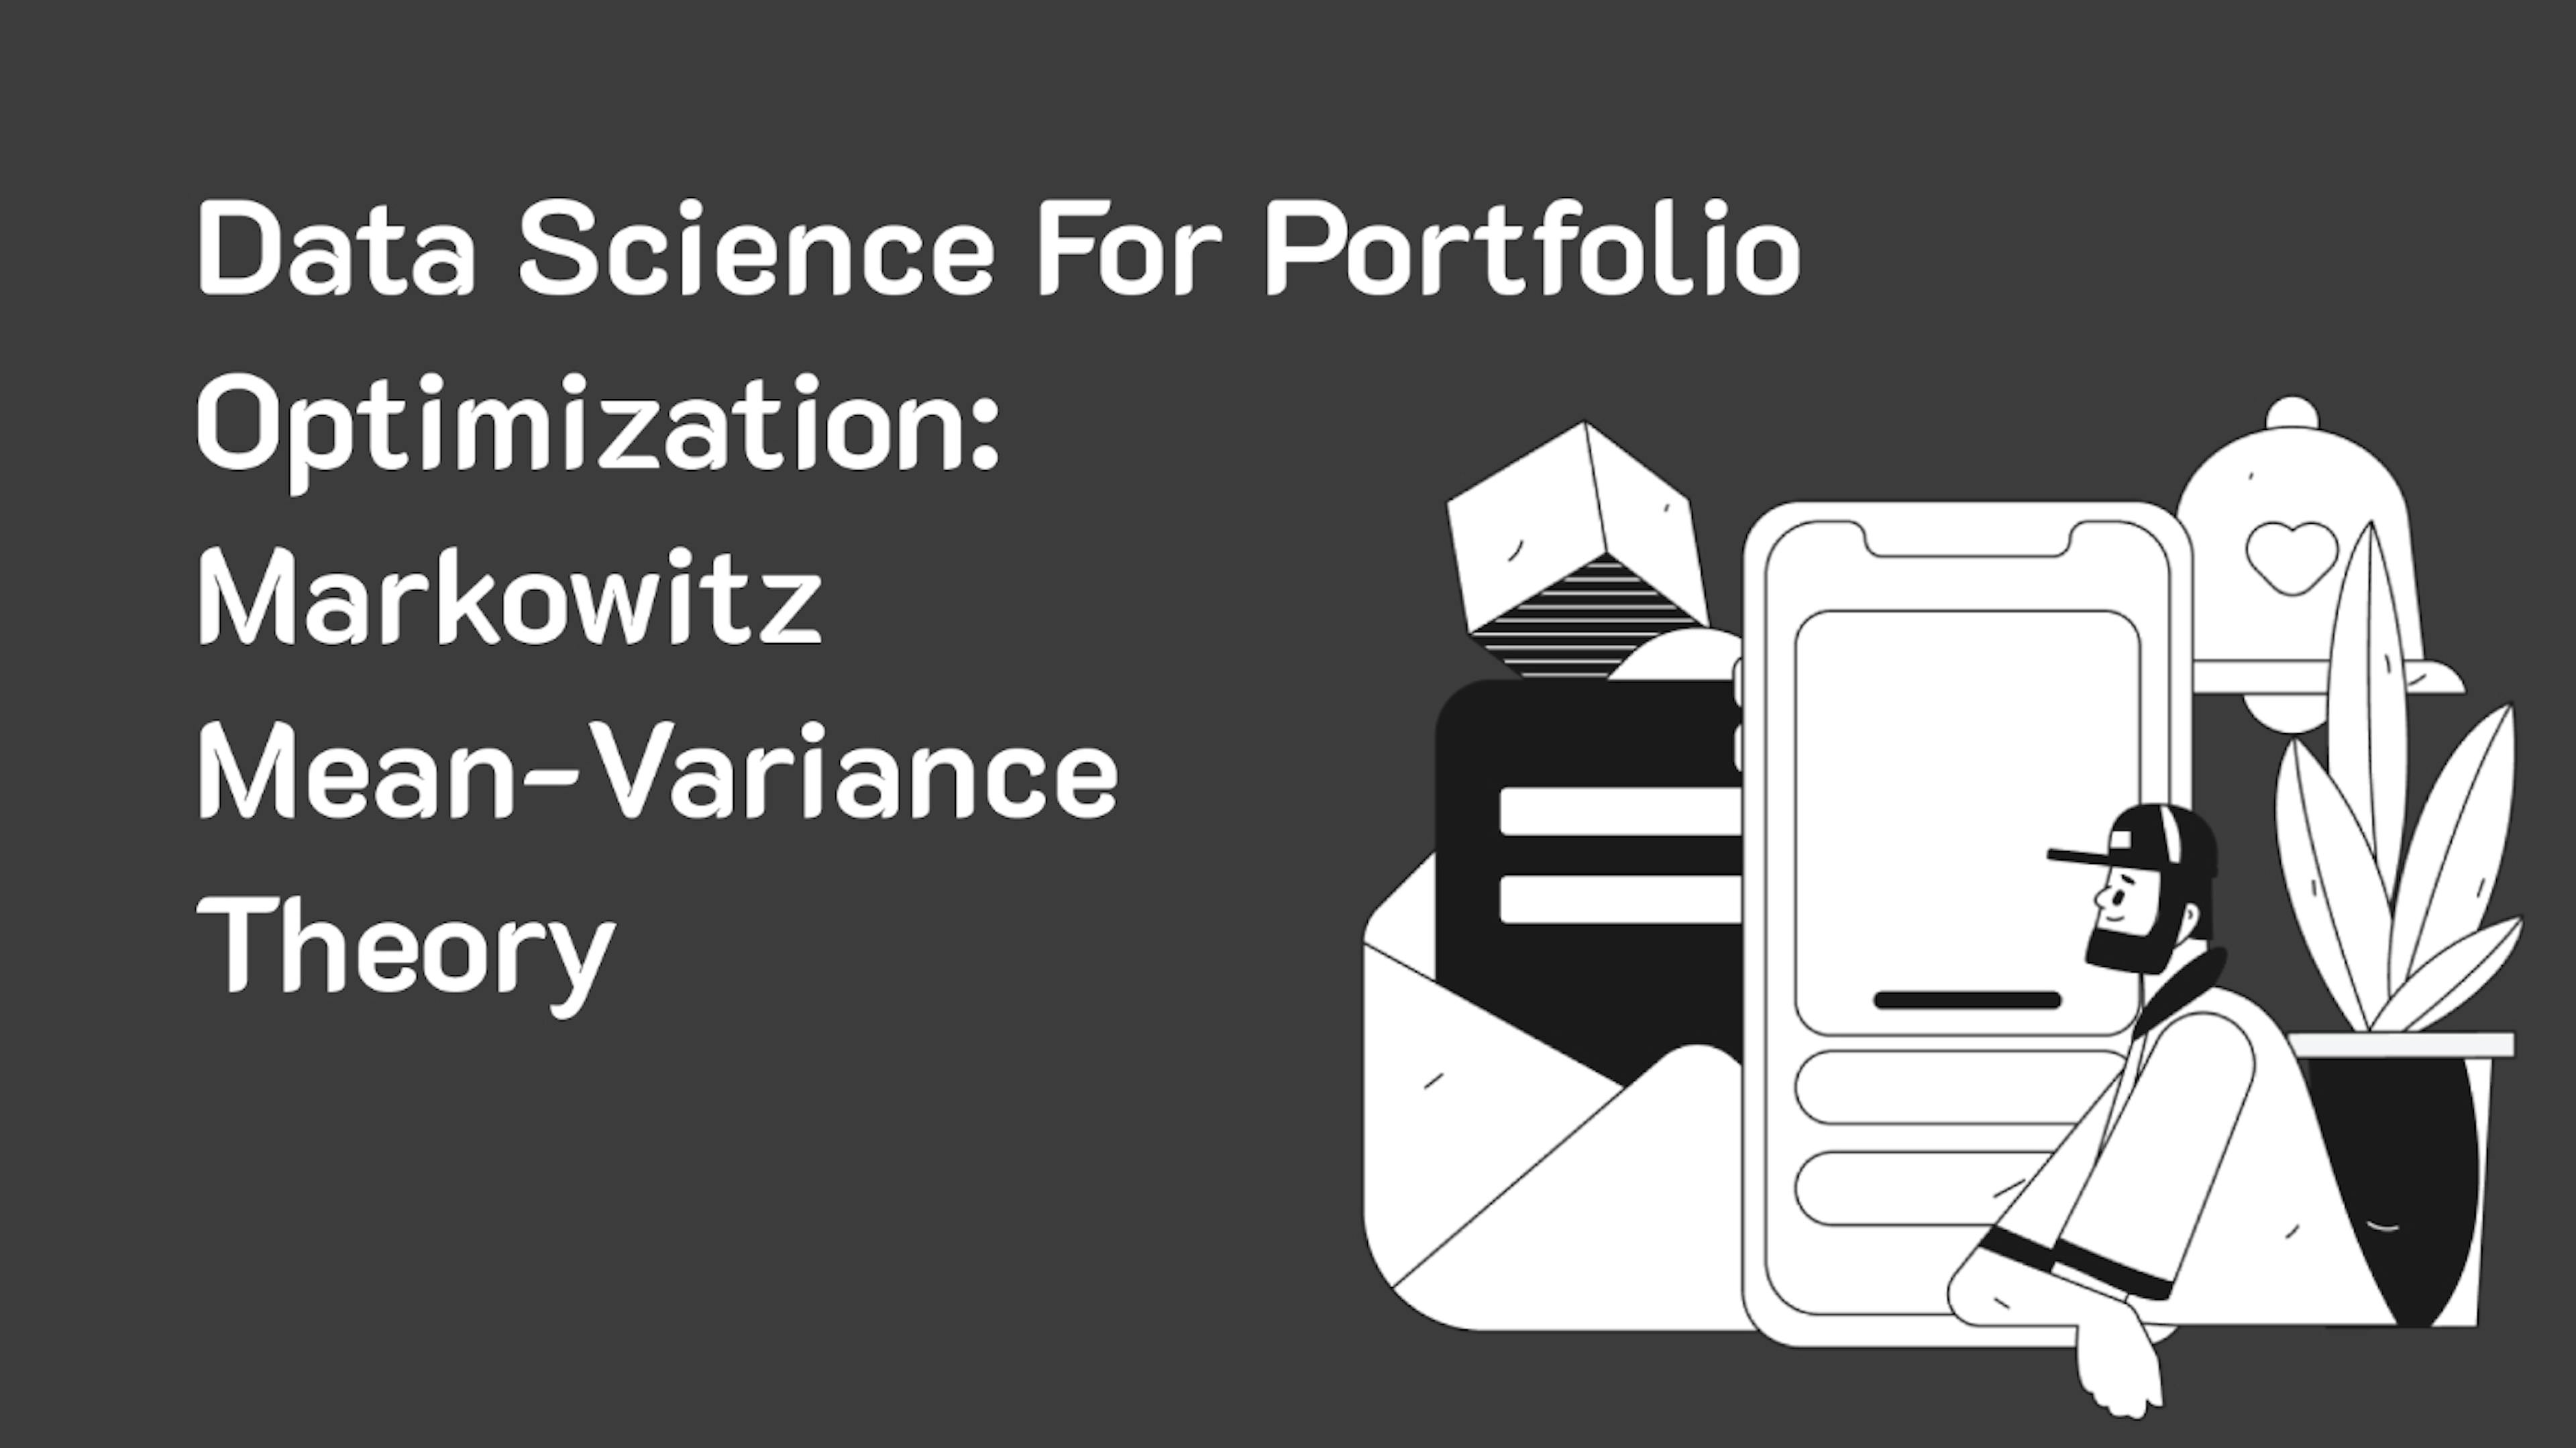 featured image - Data Science for Portfolio Optimization: Markowitz Mean-Variance Theory